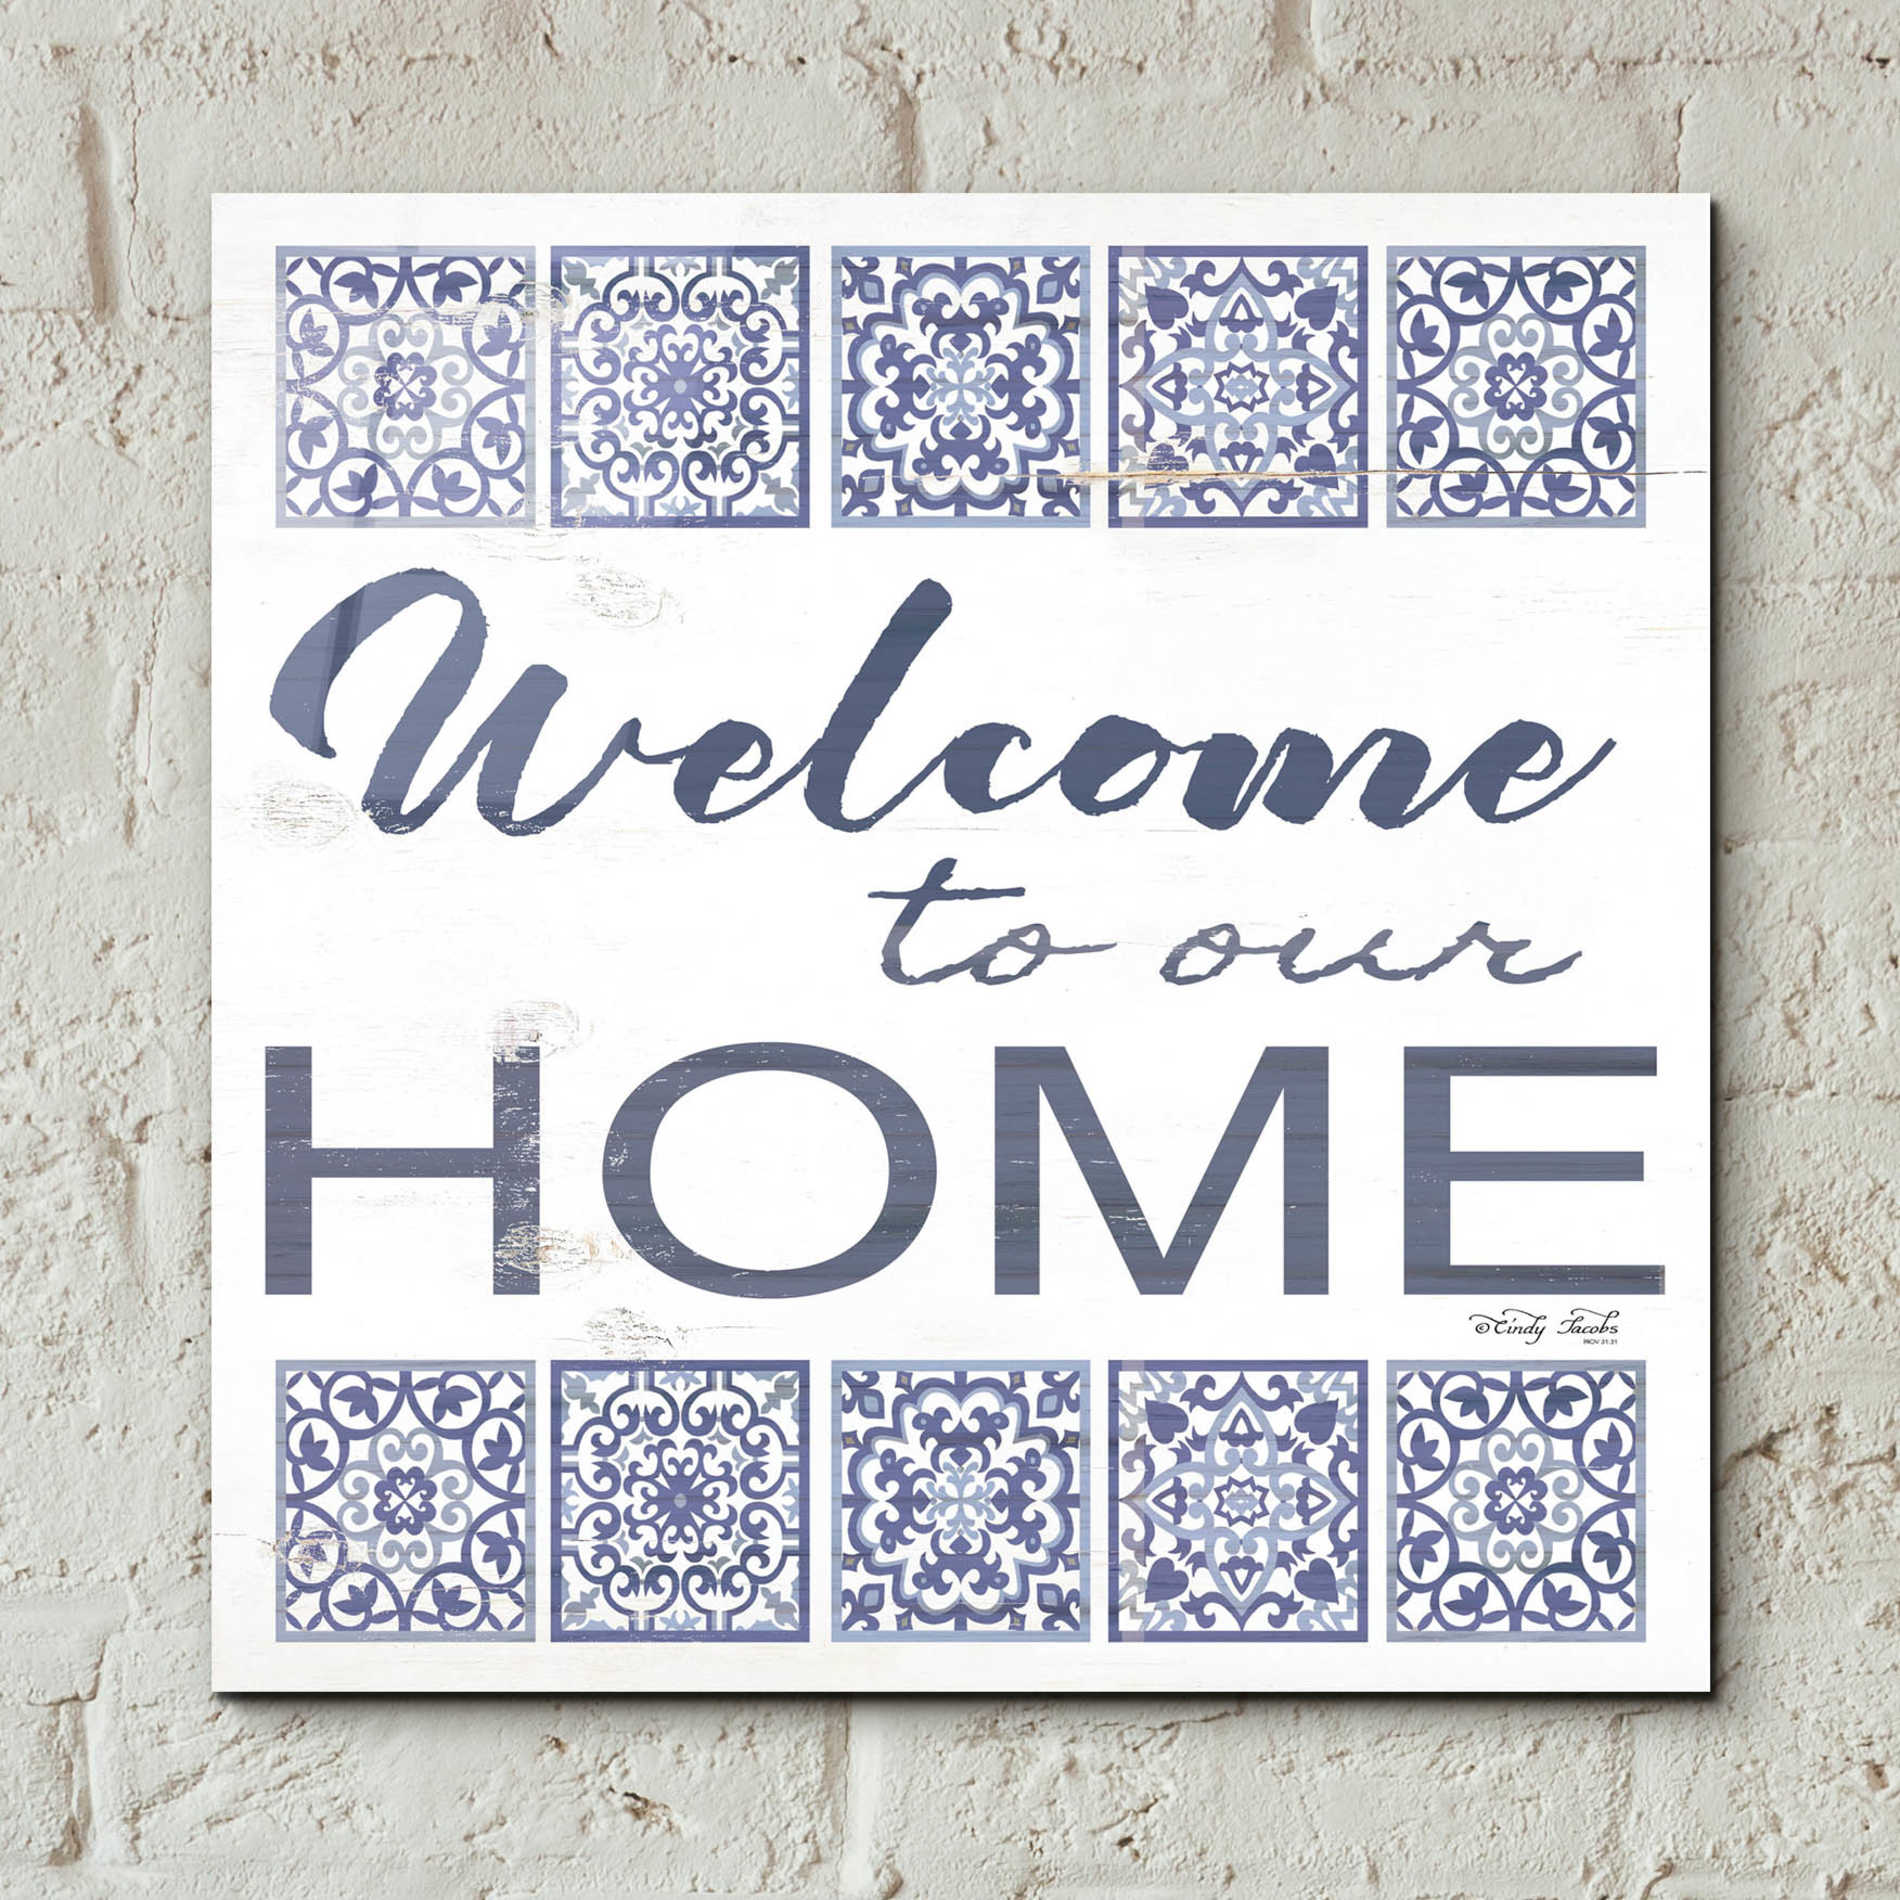 Epic Art 'Welcome to Our Home Tile' by Cindy Jacobs, Acrylic Glass Wall Art,12x12